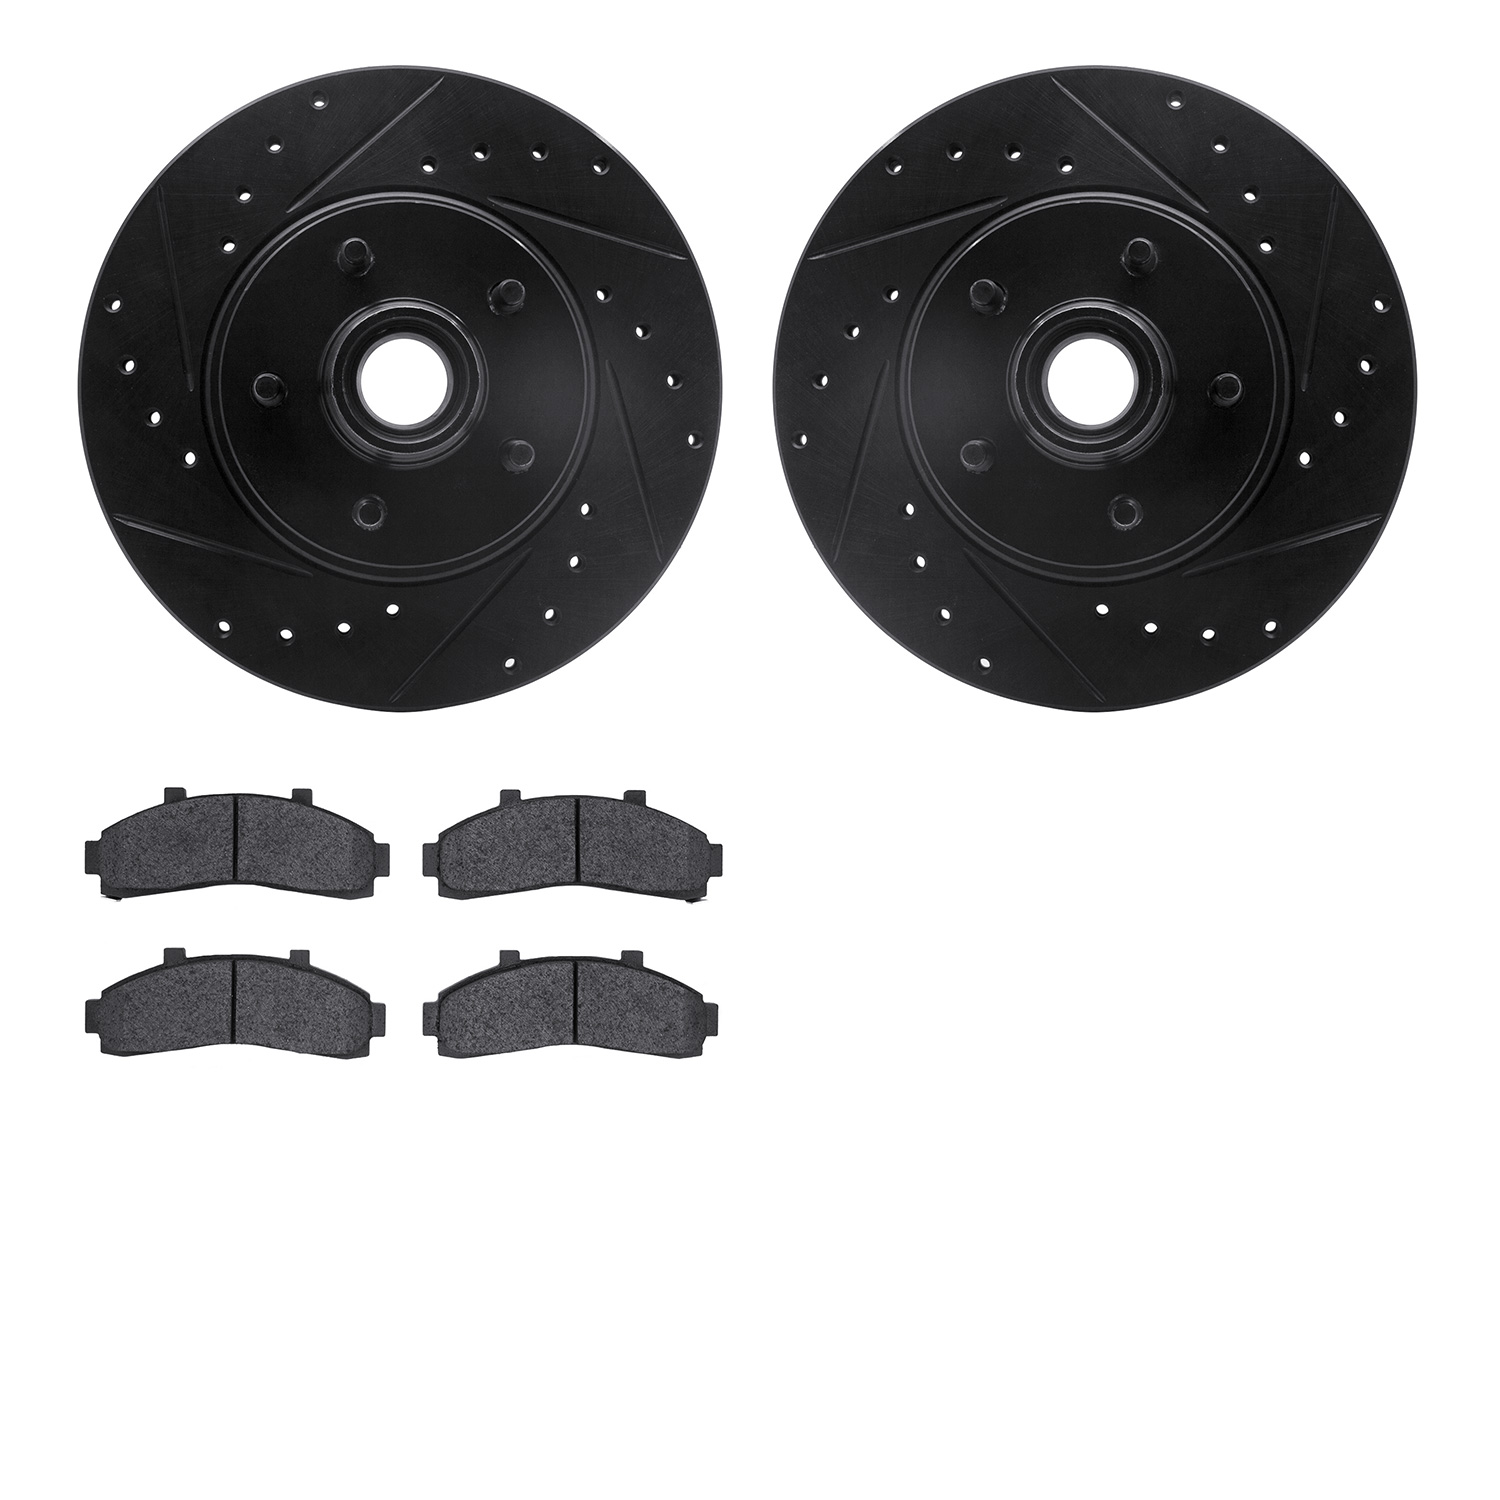 8402-54029 Drilled/Slotted Brake Rotors with Ultimate-Duty Brake Pads Kit [Black], 1995-2002 Ford/Lincoln/Mercury/Mazda, Positio